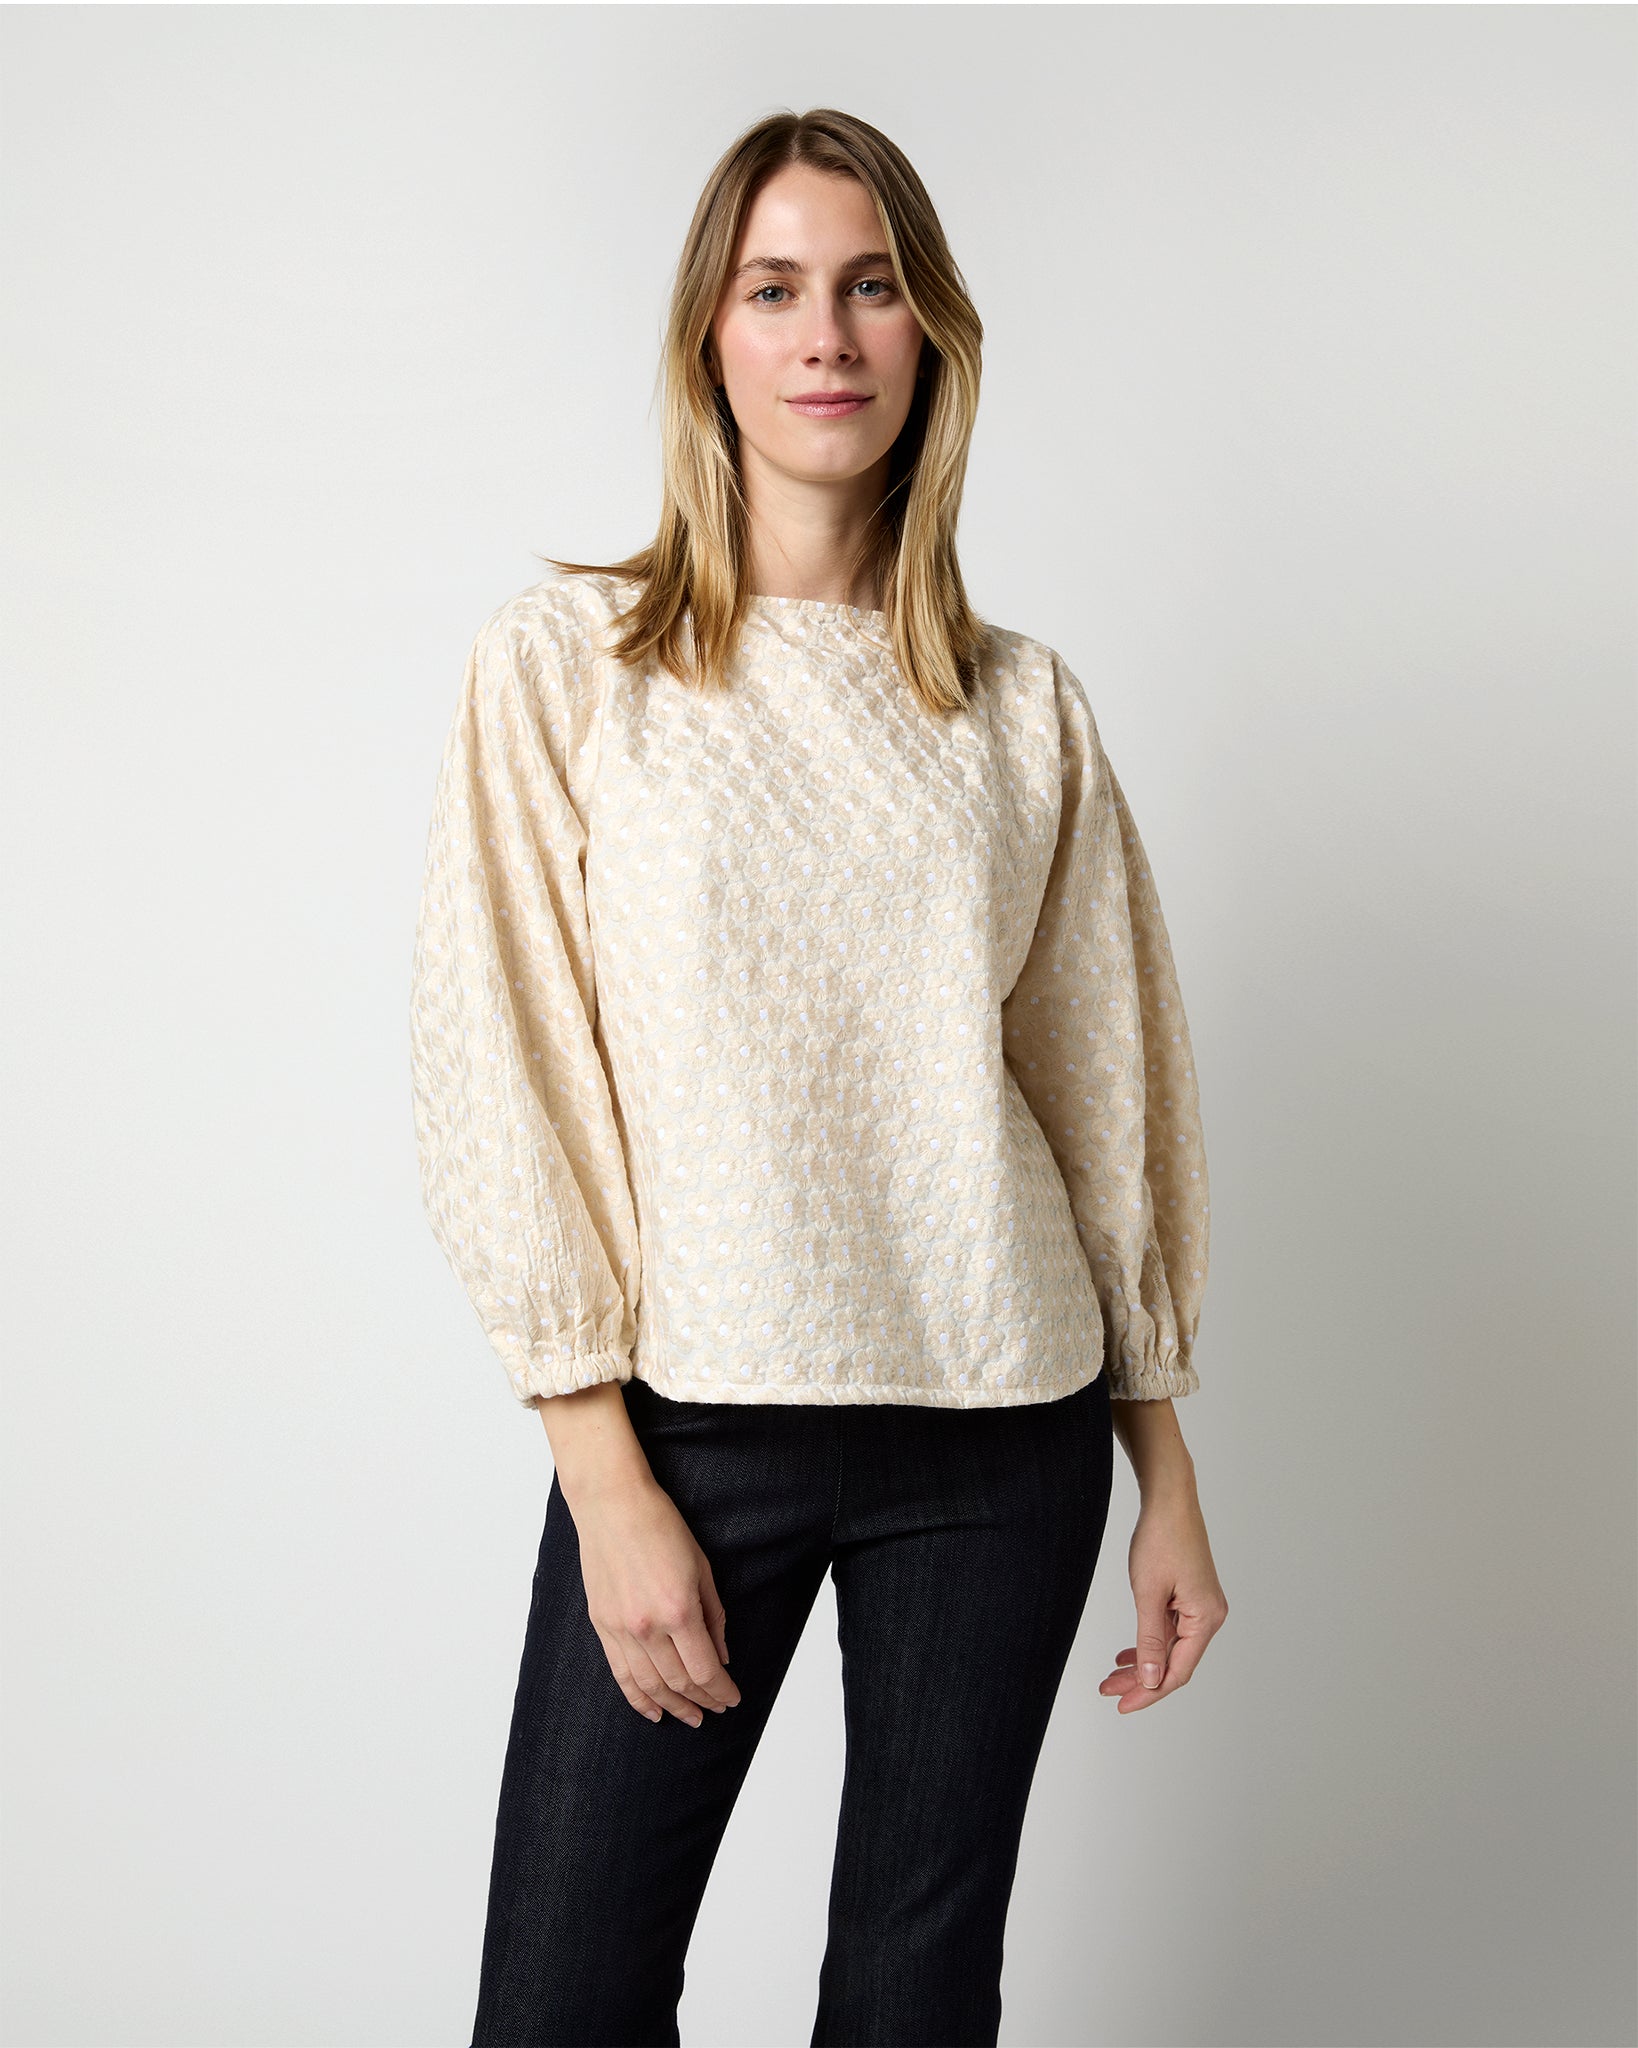 Elora Volume Top in Ivory Floral Embroidered Poplin